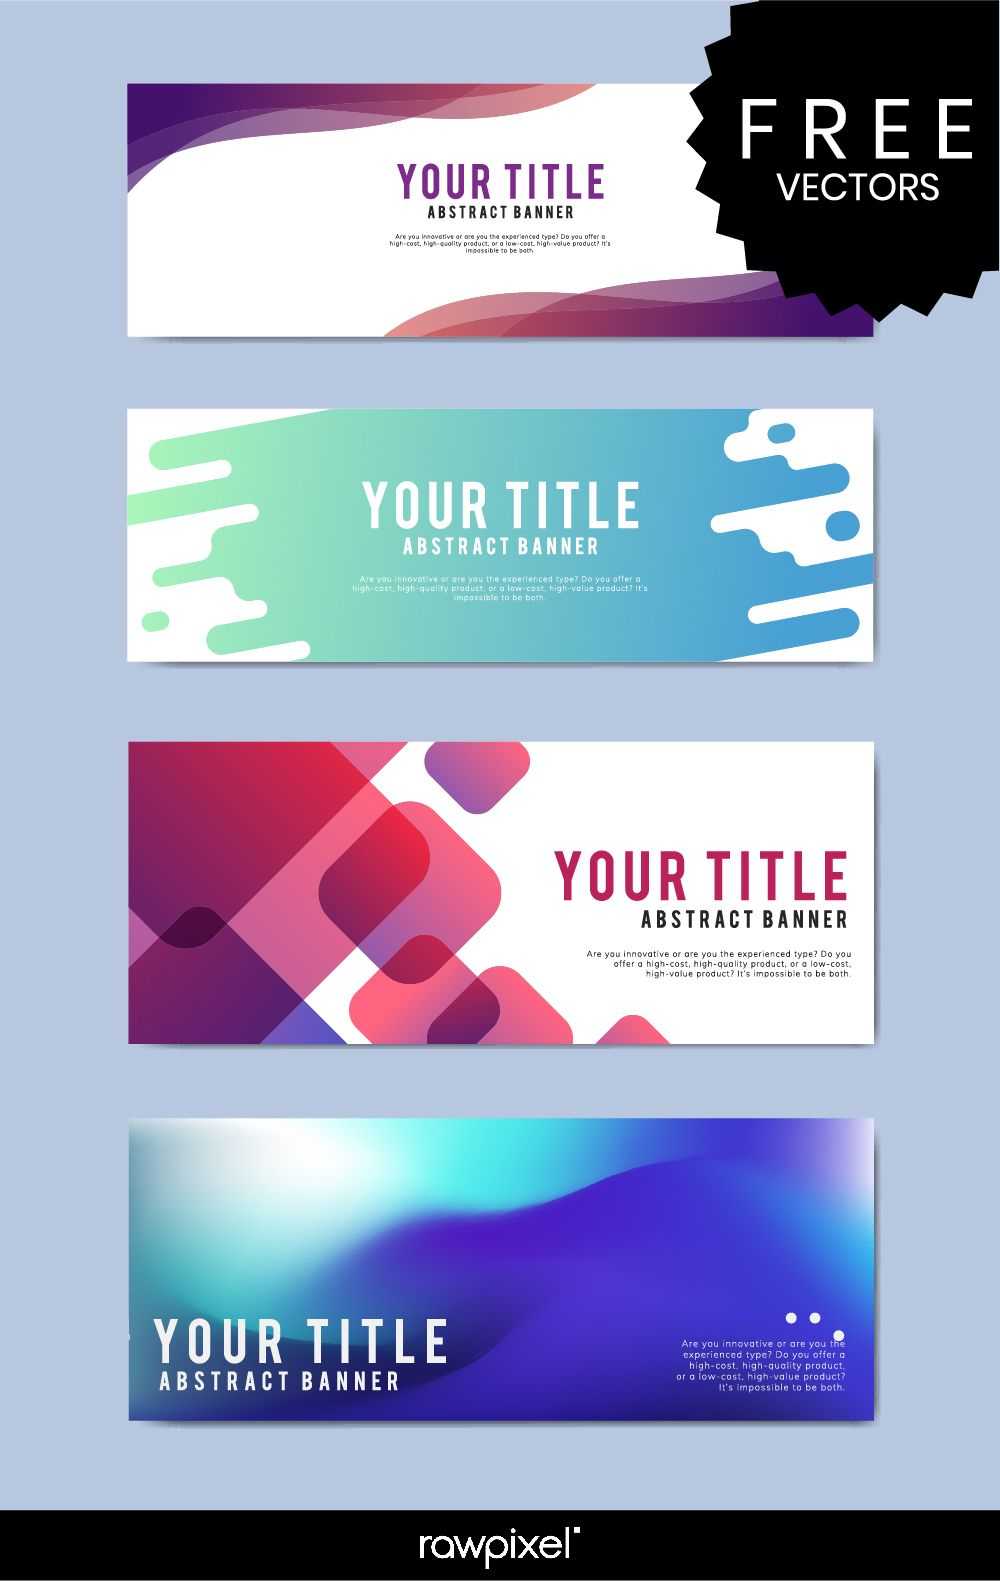 Download Free Modern Business Banner Templates At Rawpixel With Free Website Banner Templates Download